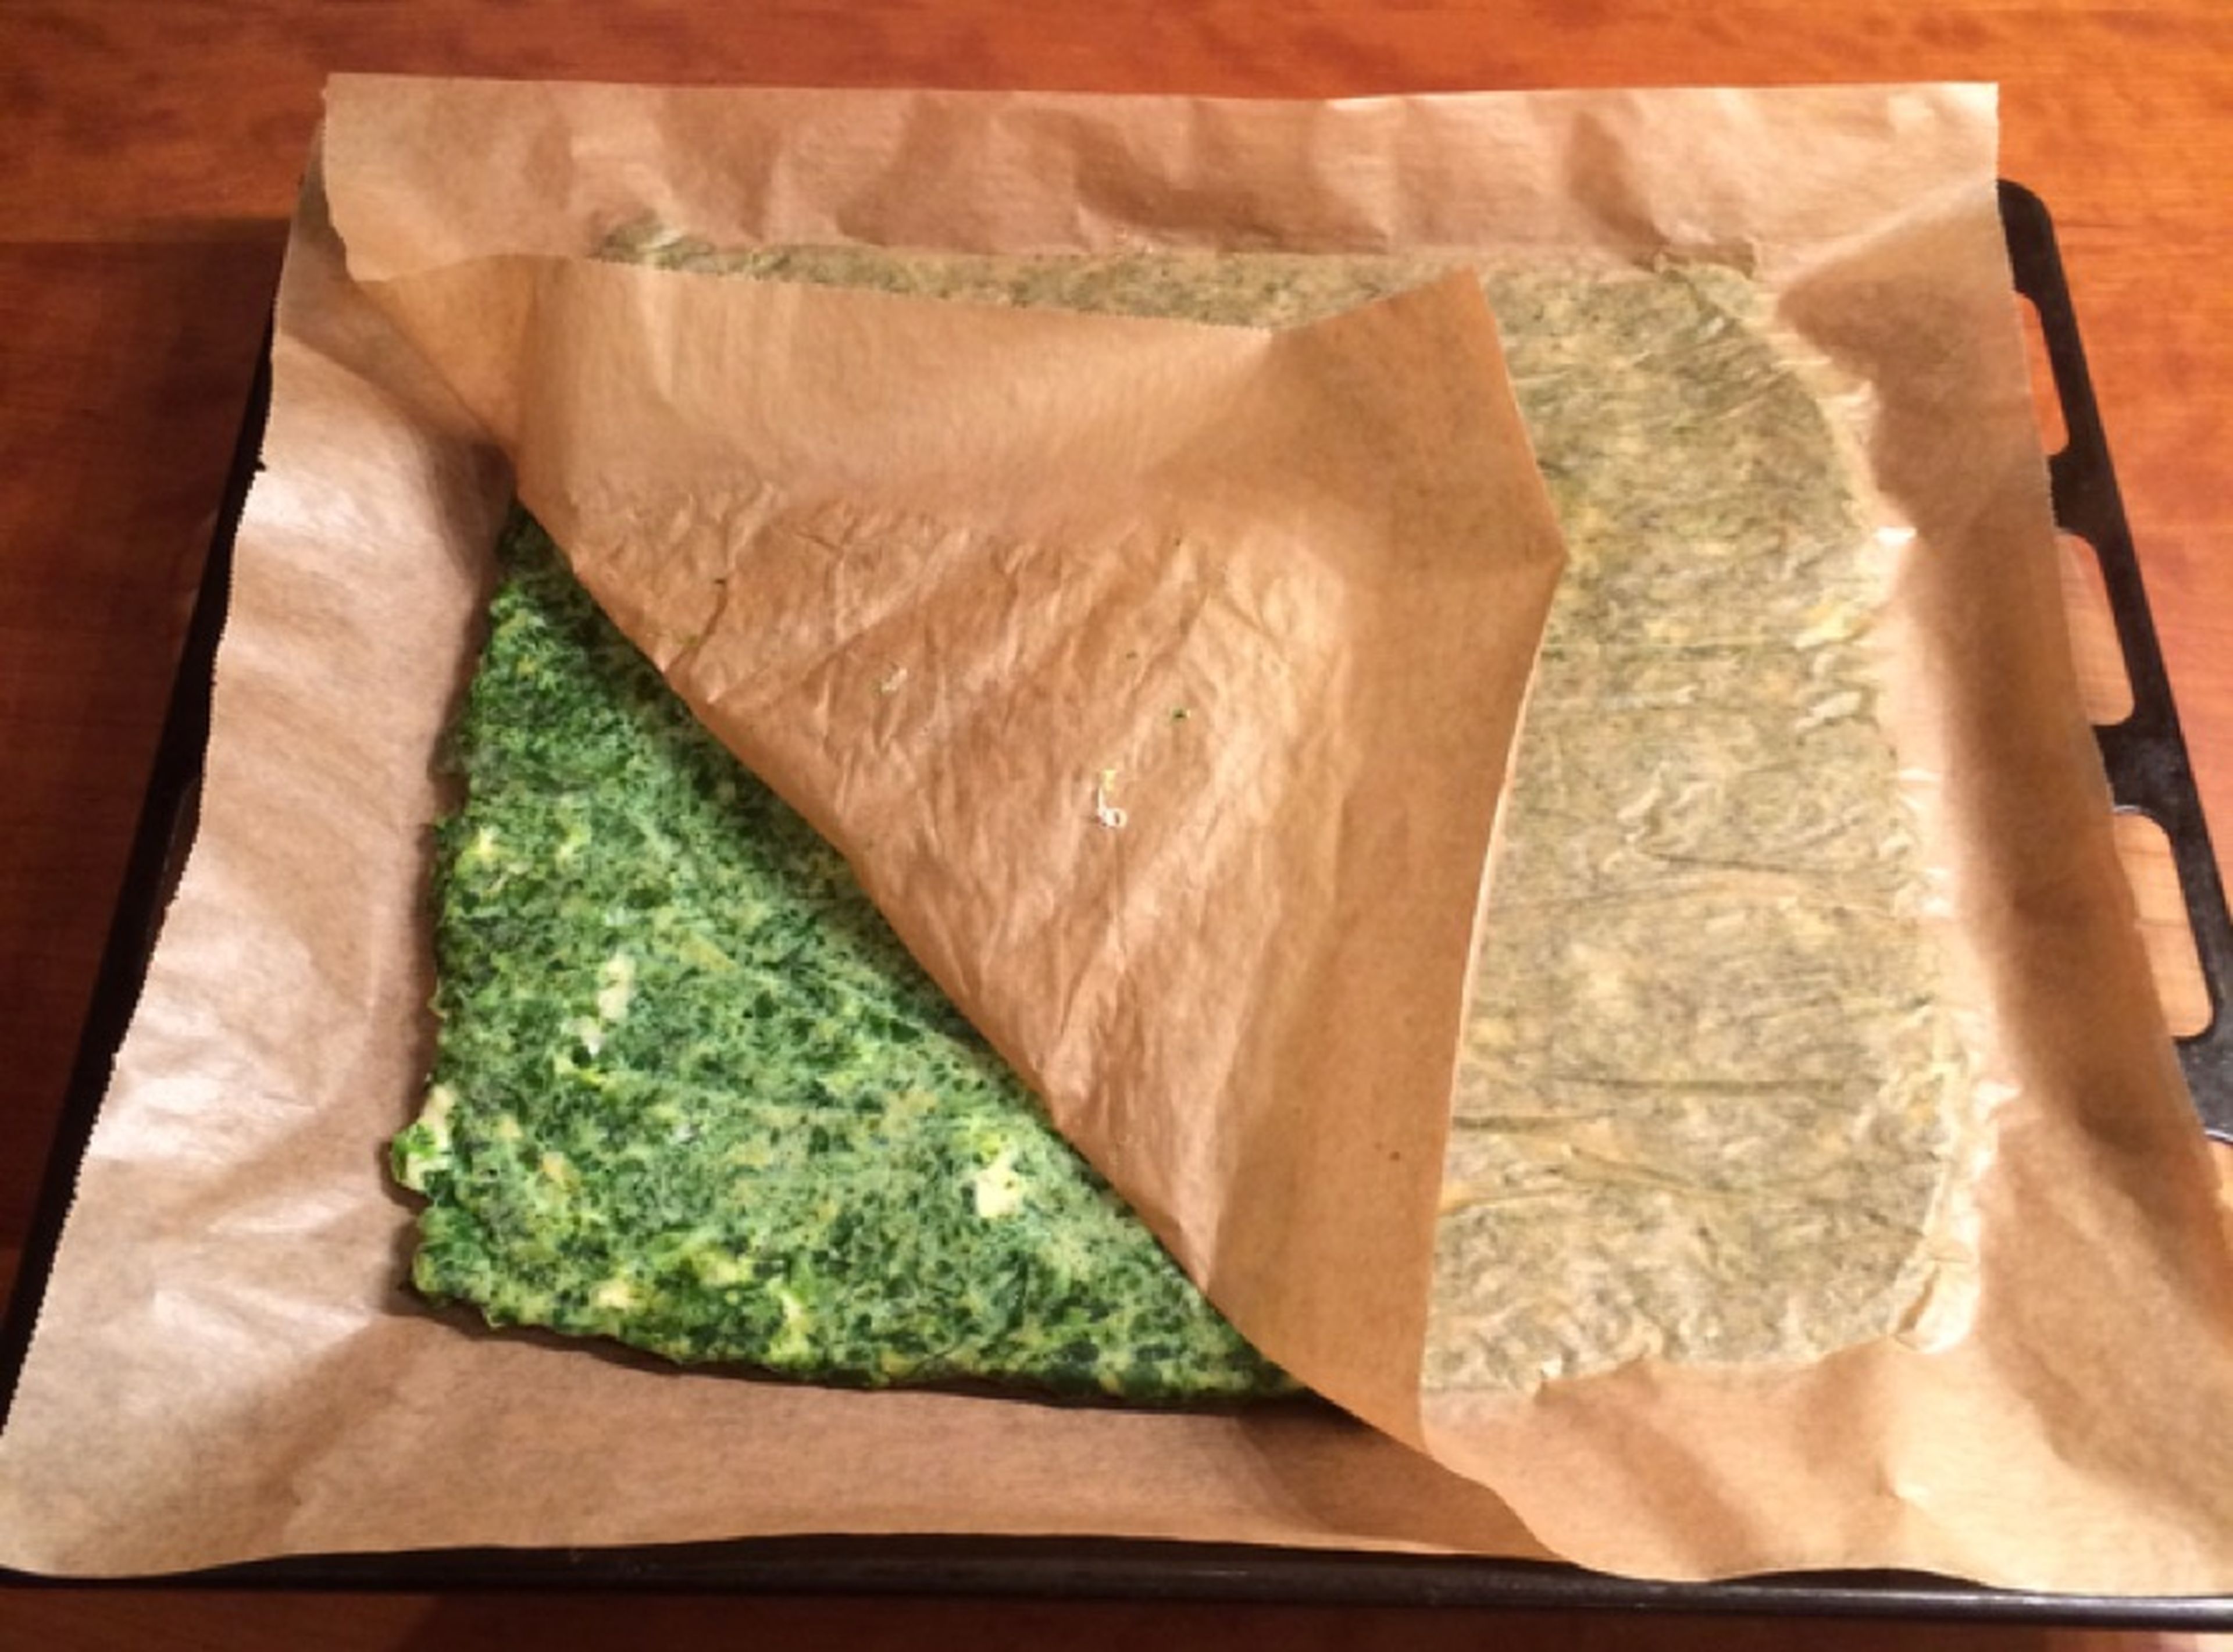 Take another sheet of parchment paper to carefully turn the spinach layer upside down. Gently peel off the first sheet of parchment paper. Bake again for approx. 10 min.